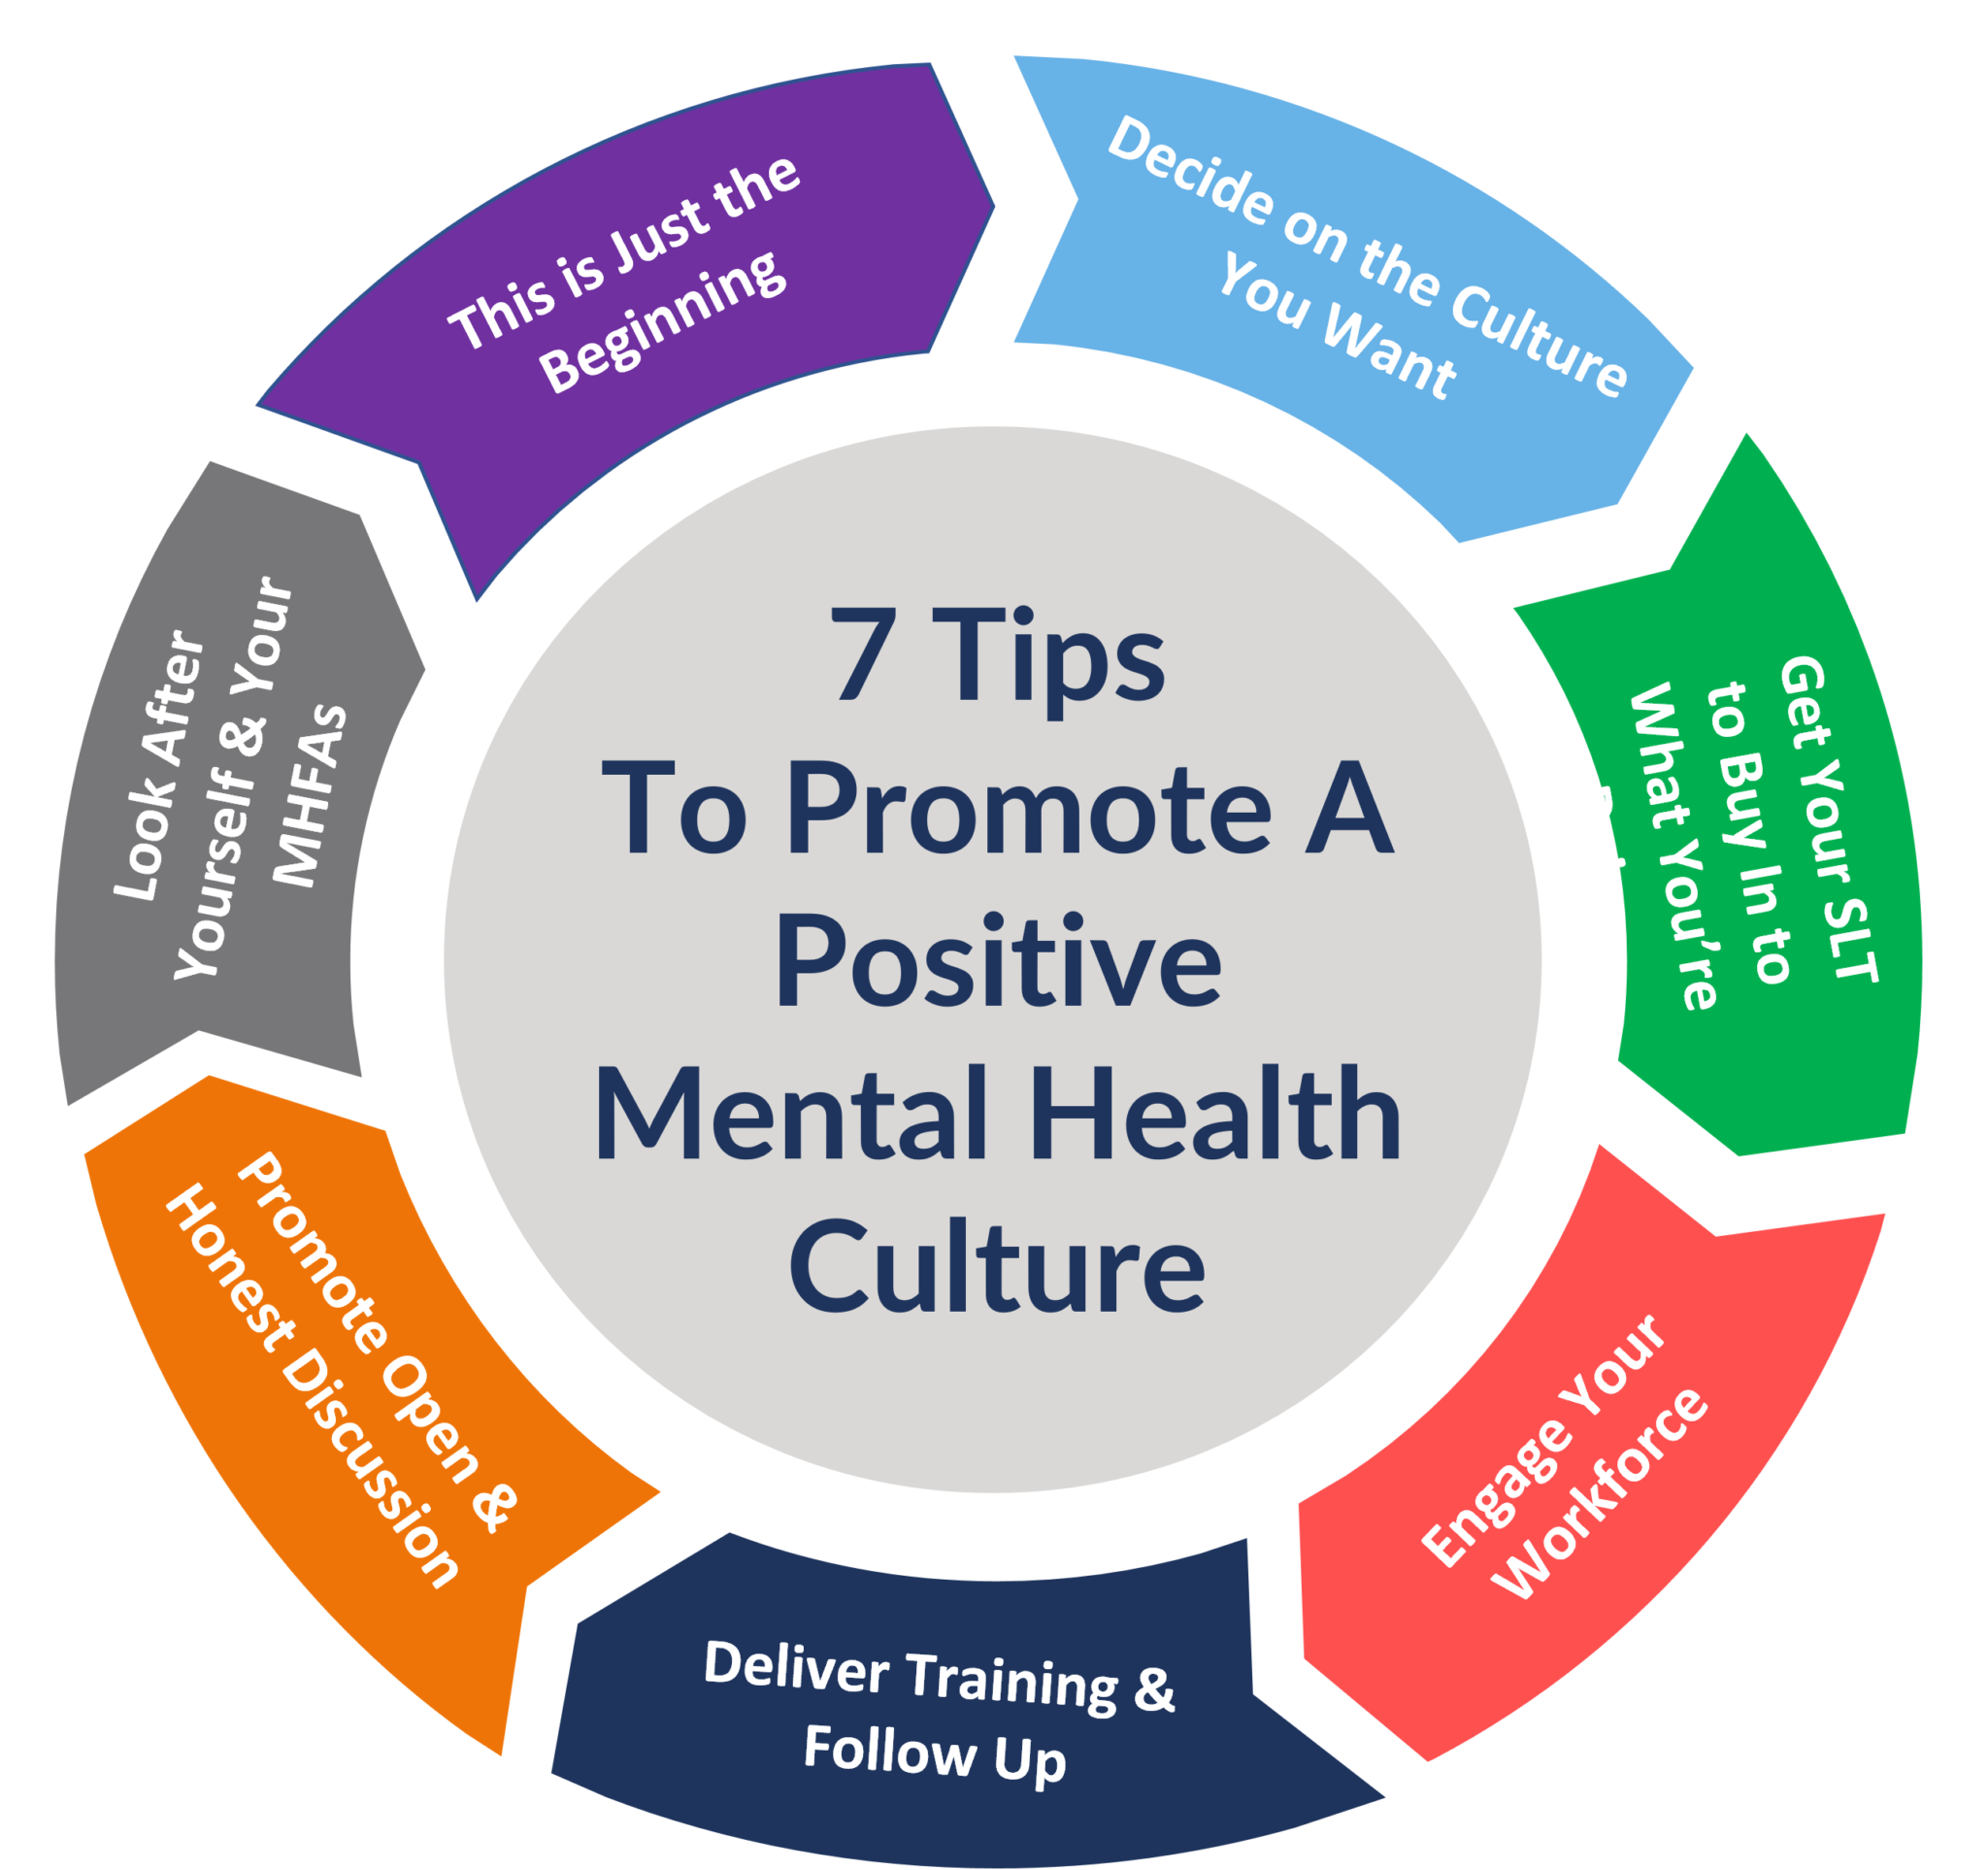 7-tips-to-promote-a-positive-mental-health-culture-3b-training